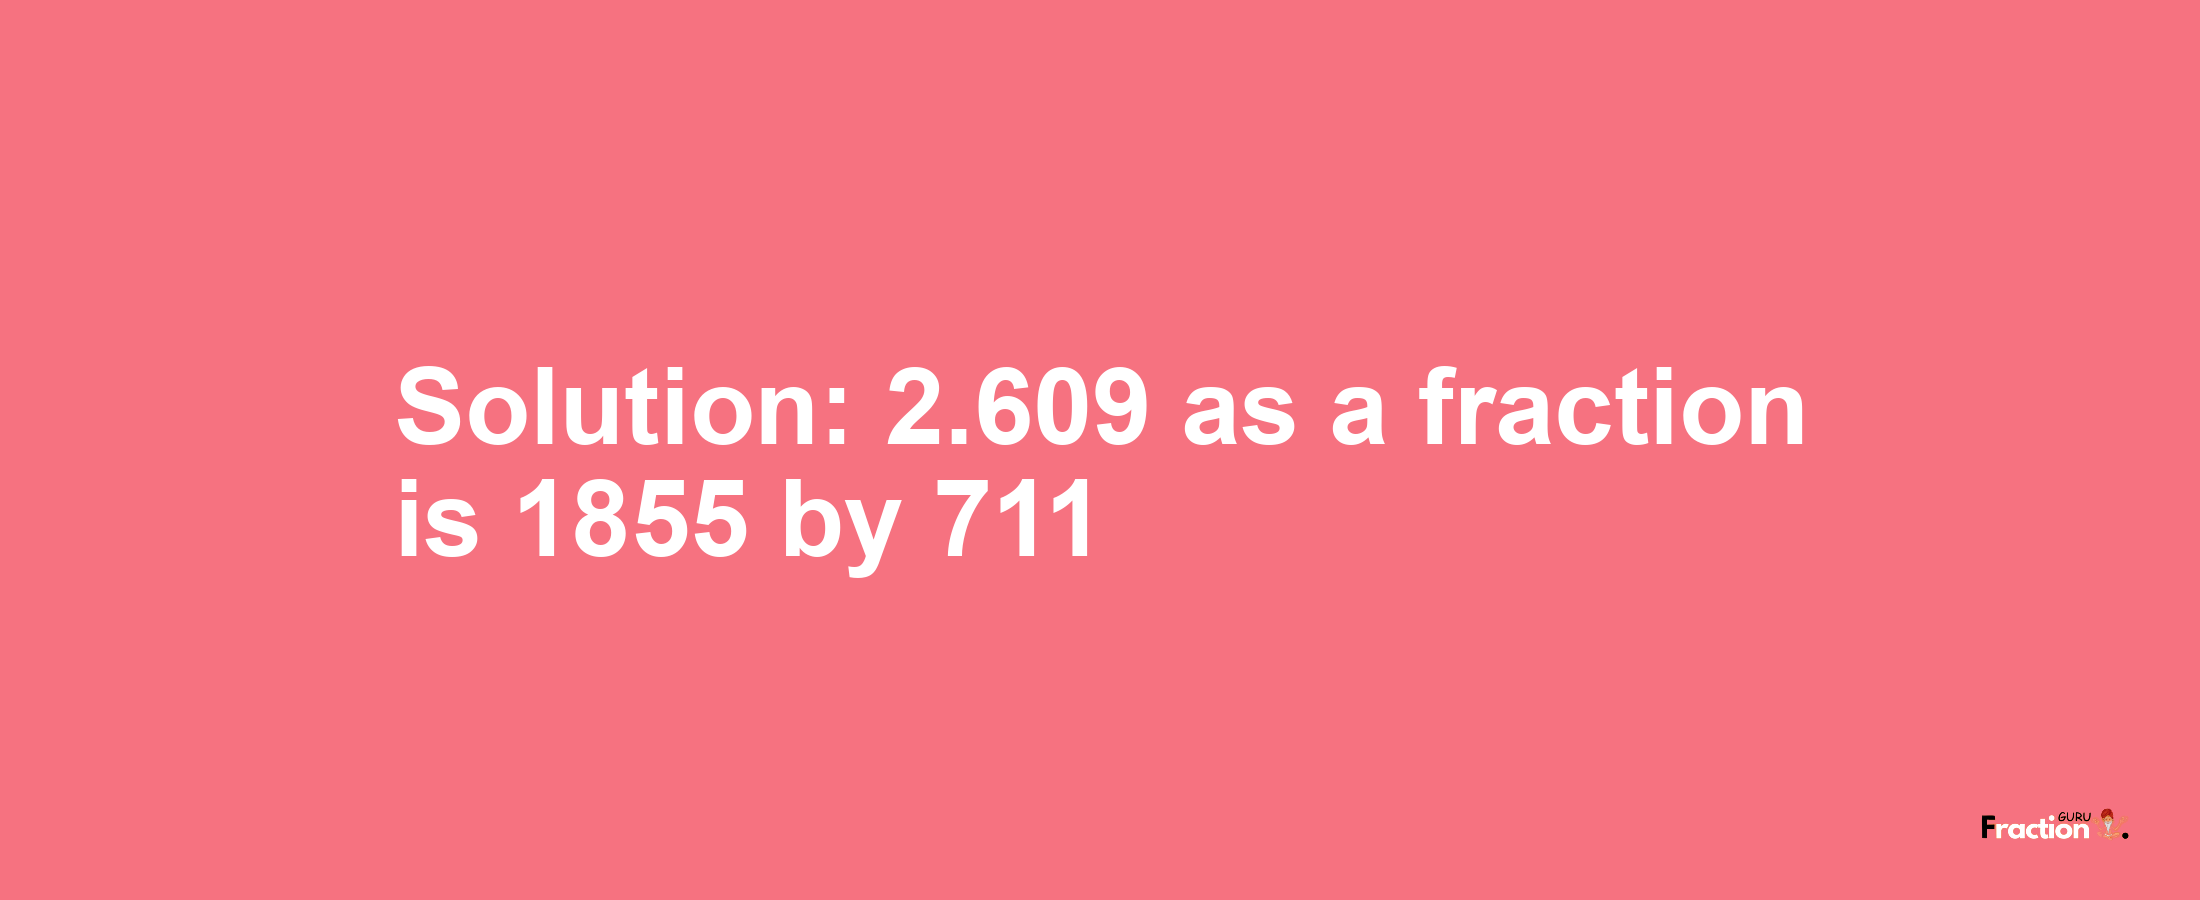 Solution:2.609 as a fraction is 1855/711